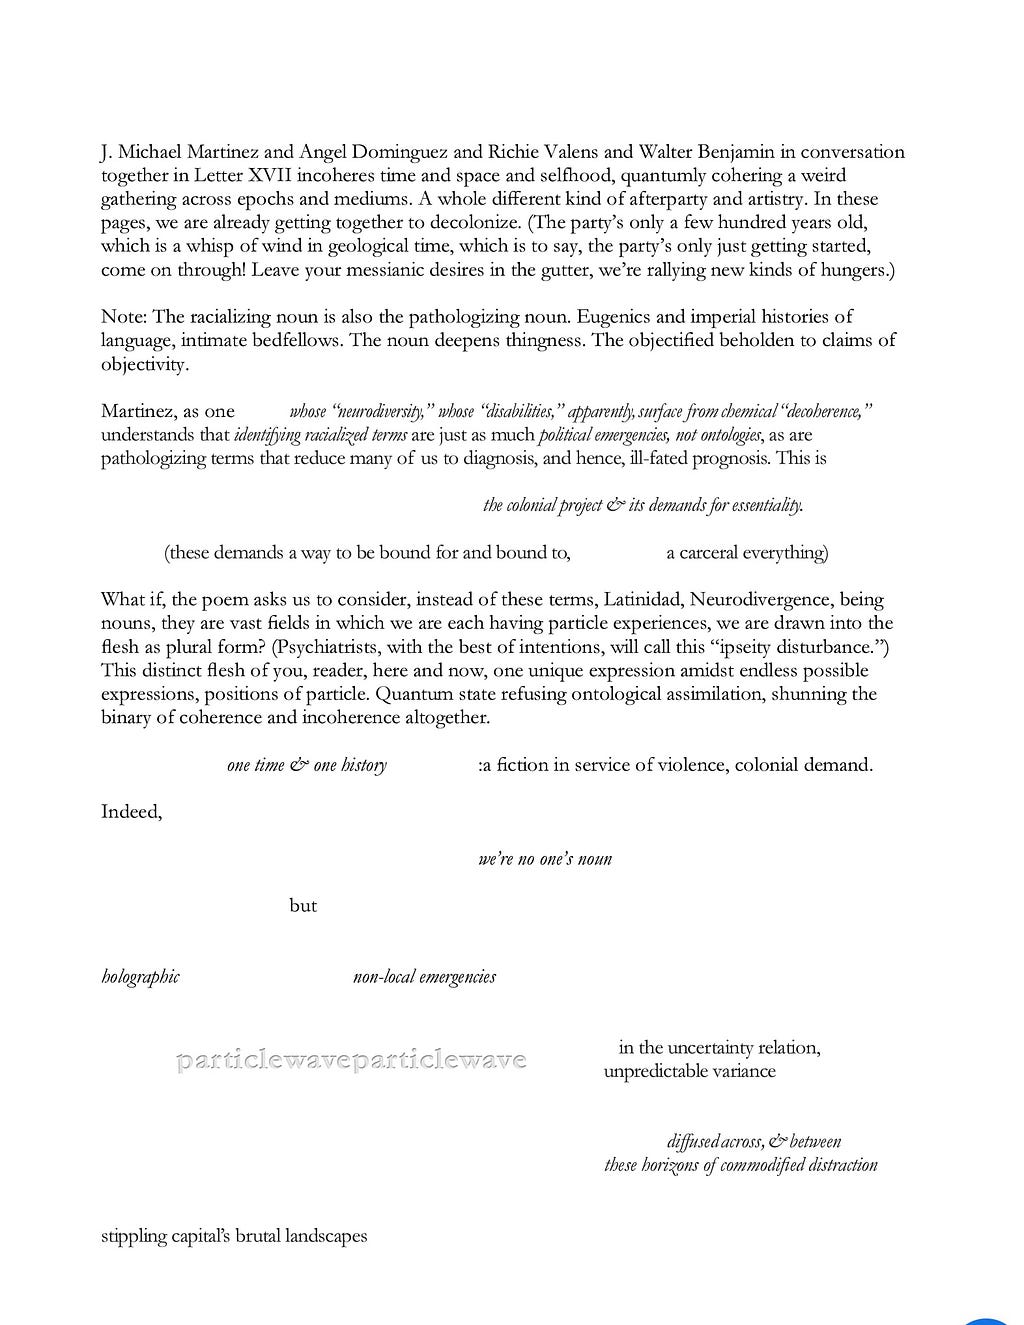 Page 1 of 3 of heidi andrea restrepo rhodes’ response to J. Michael Martinez’ poem, Letter XVII. Posted as PDF to preserve unique layout of writing. For accessible text see below images.